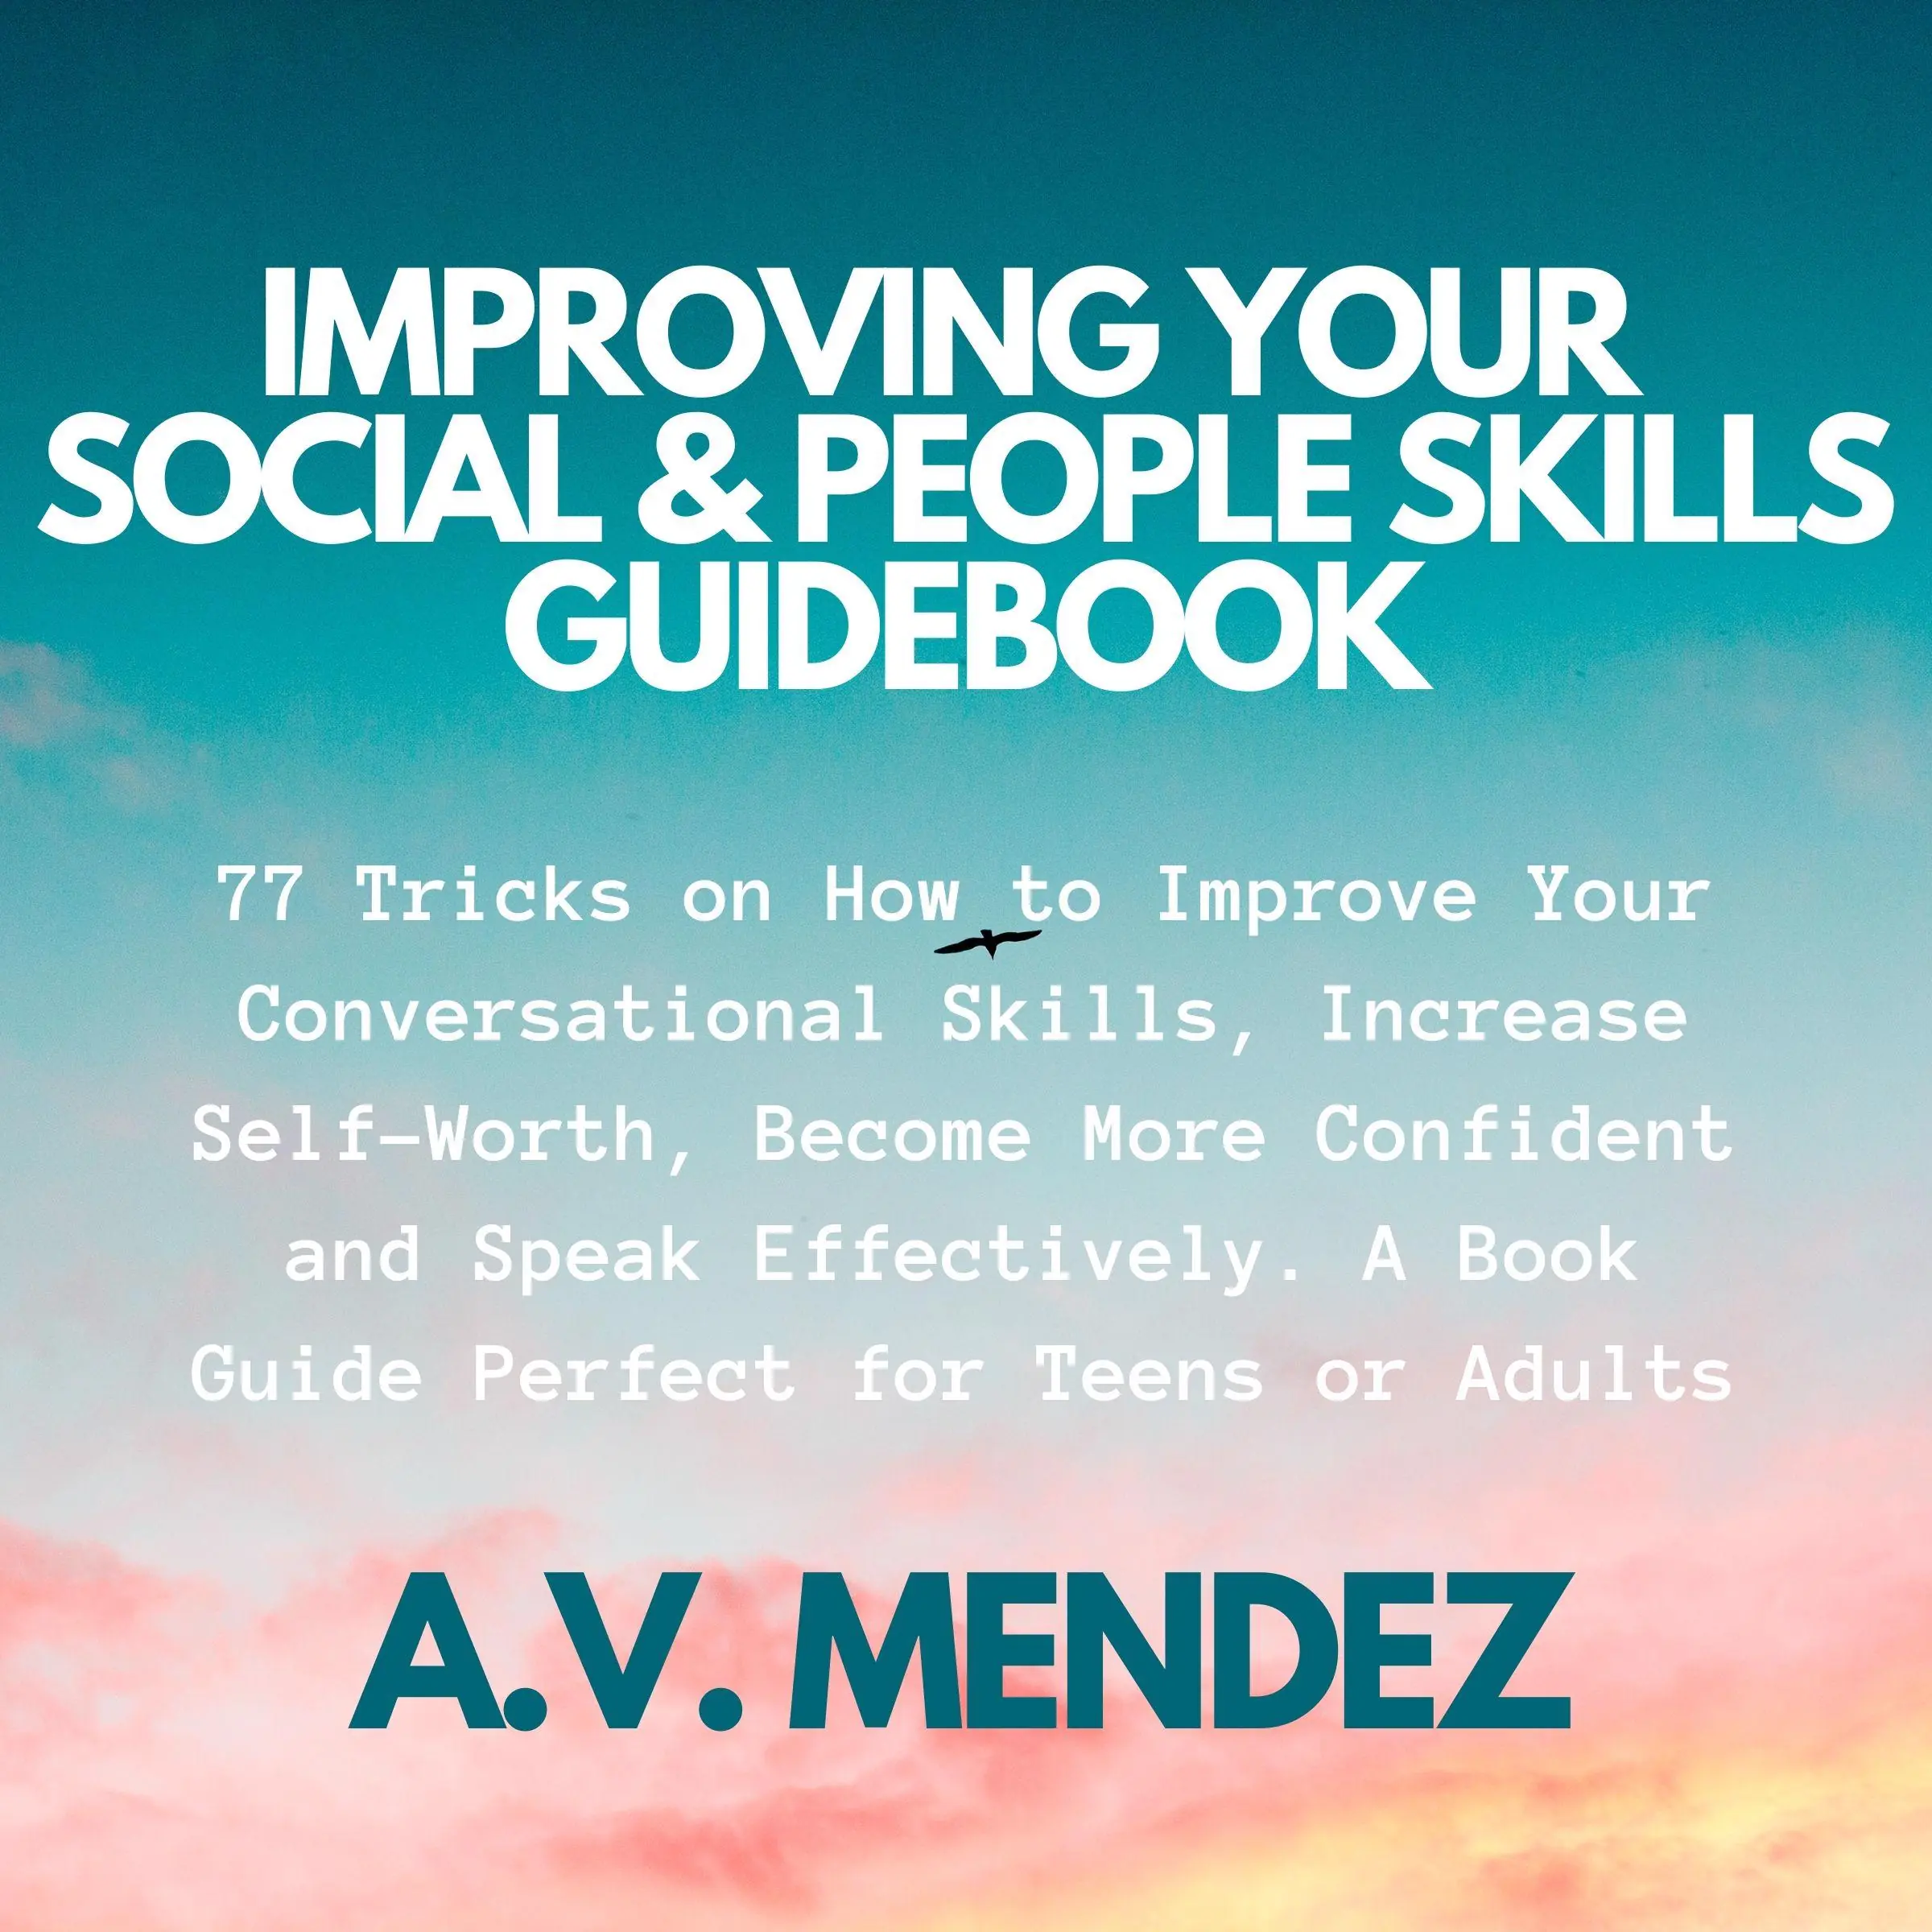 Improving Your Social & People Skills Guidebook: 77 Tricks on How to Improve Your Conversational Skills, Increase Self-Worth, Become More Confident and Speak Effectively. A Book Guide Perfect for Teens or Adults. Audiobook by A.V. Mendez